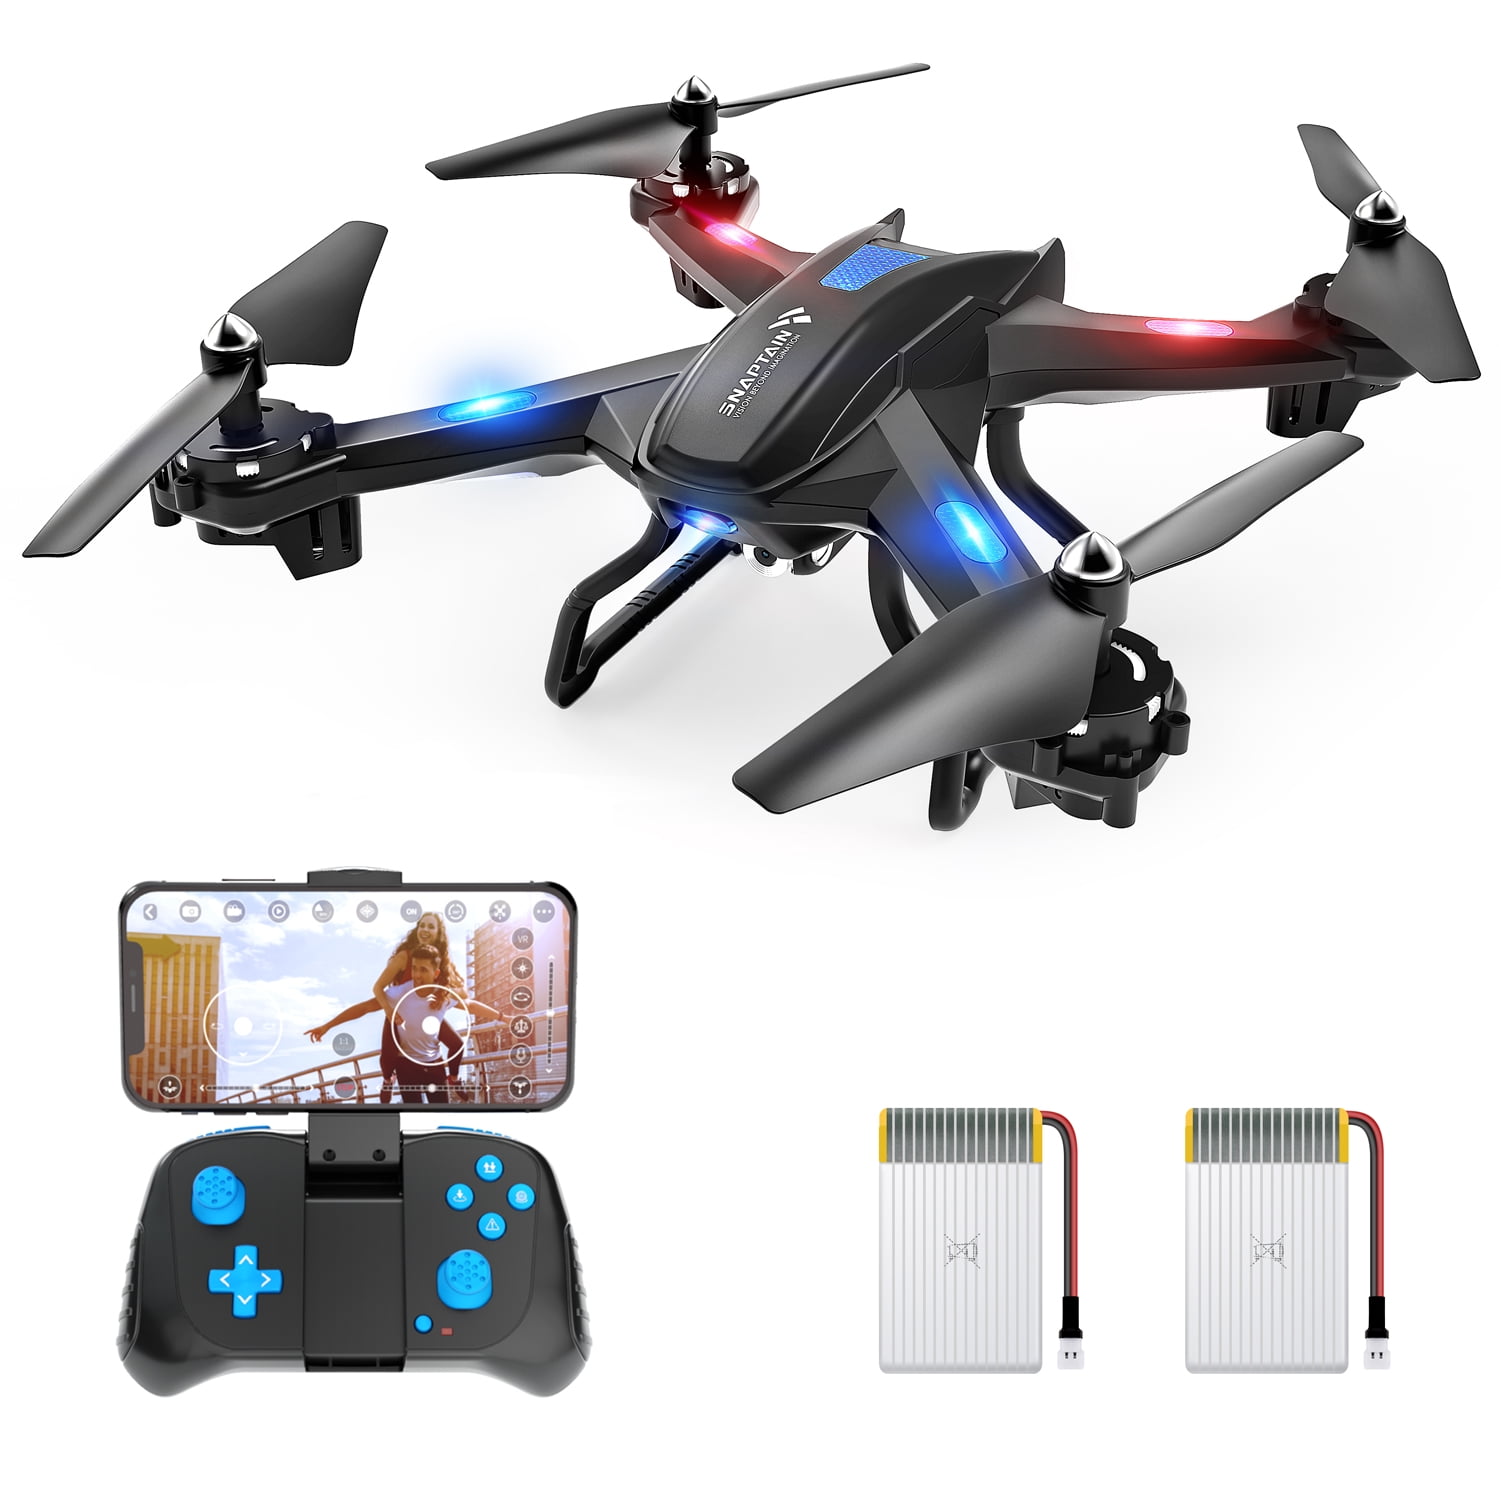 SNAPTAIN S5C WiFi FPV Drone with 720P HD Camera, Voice Control, Gesture Control RC Quadcopter for Beginners with Altitude Hold, RTF One Key Take Off/Landing, Compatible w/VR Headset - Walmart.com